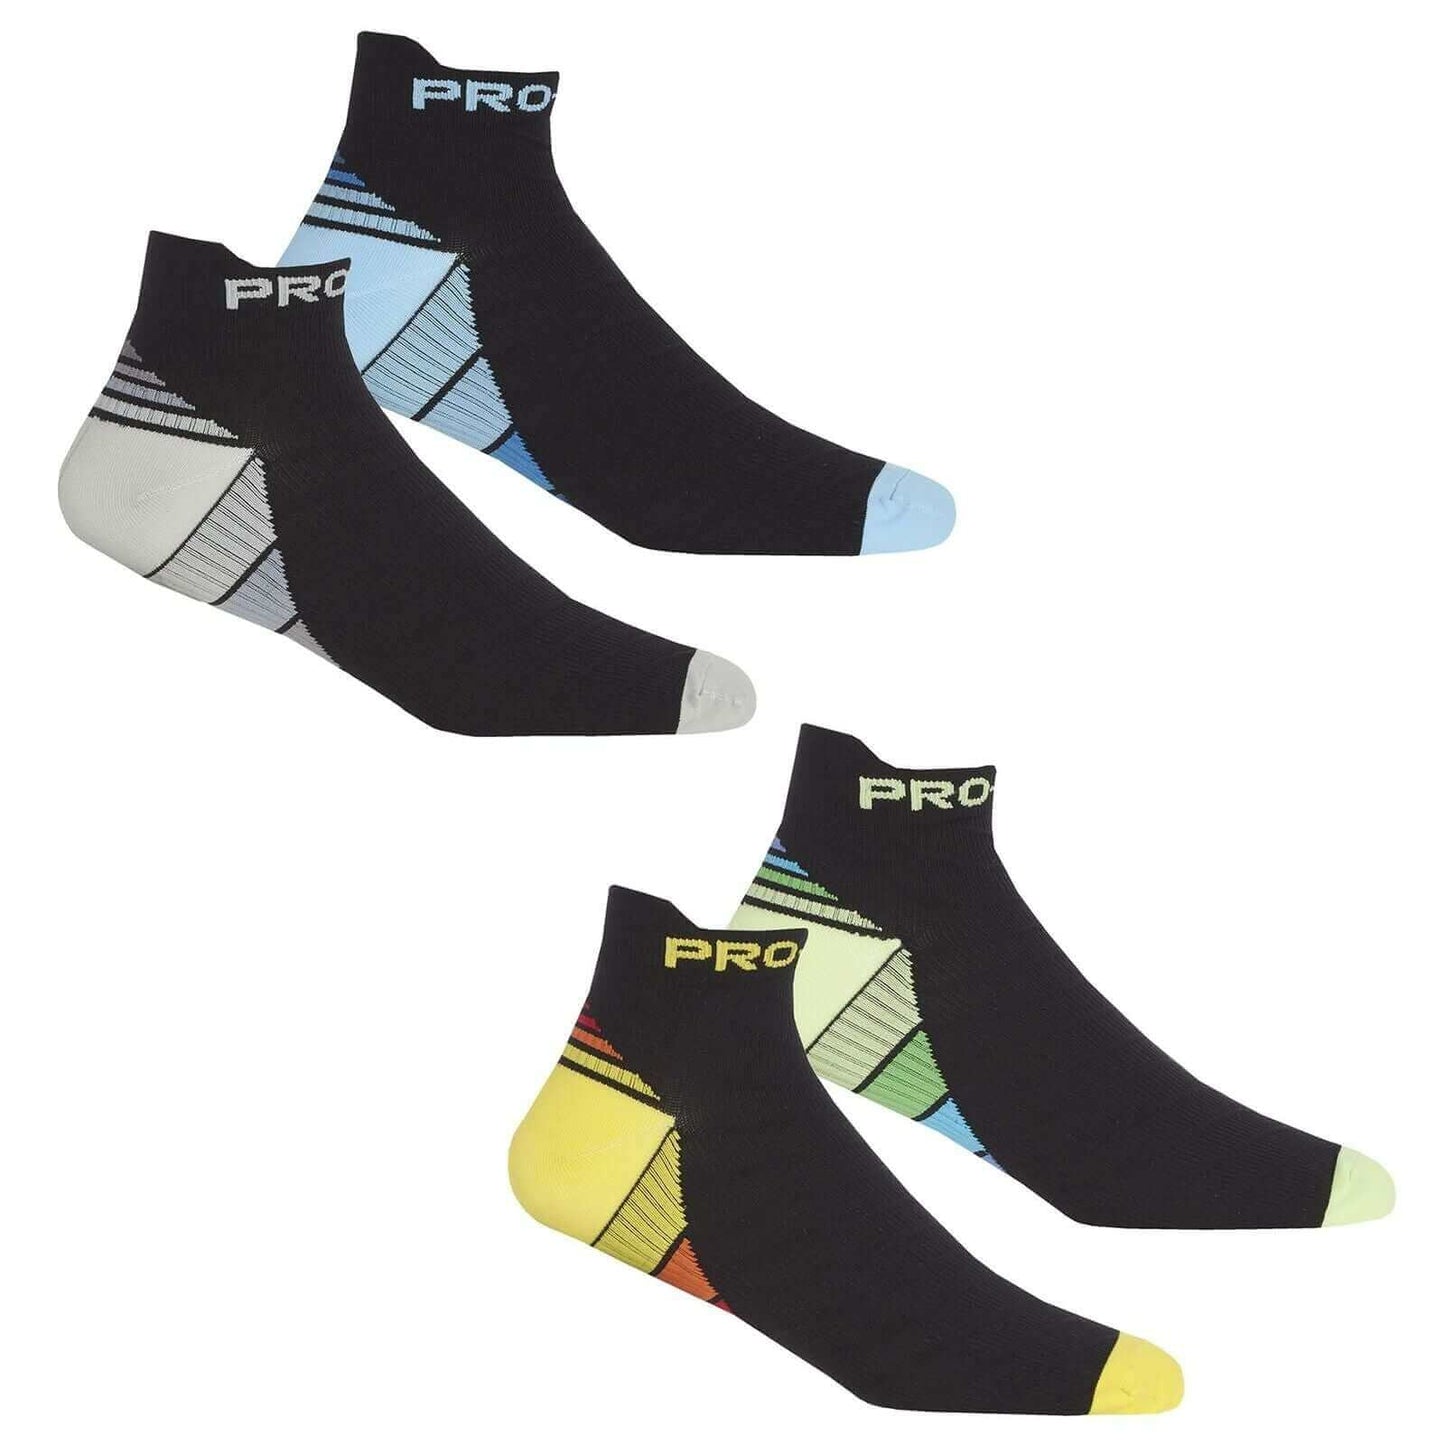 Pack Of 4 Men's Compression Low-Cut Running Training Gym Sock. Buy now for £9.00. A Socks by Sock Stack. 6-11, assorted, athletics, black, blue, boot, comfortable, cosy, elastane, gym, hiking, low cut, mens, mens socks, outdoor, running, socks, sports, st